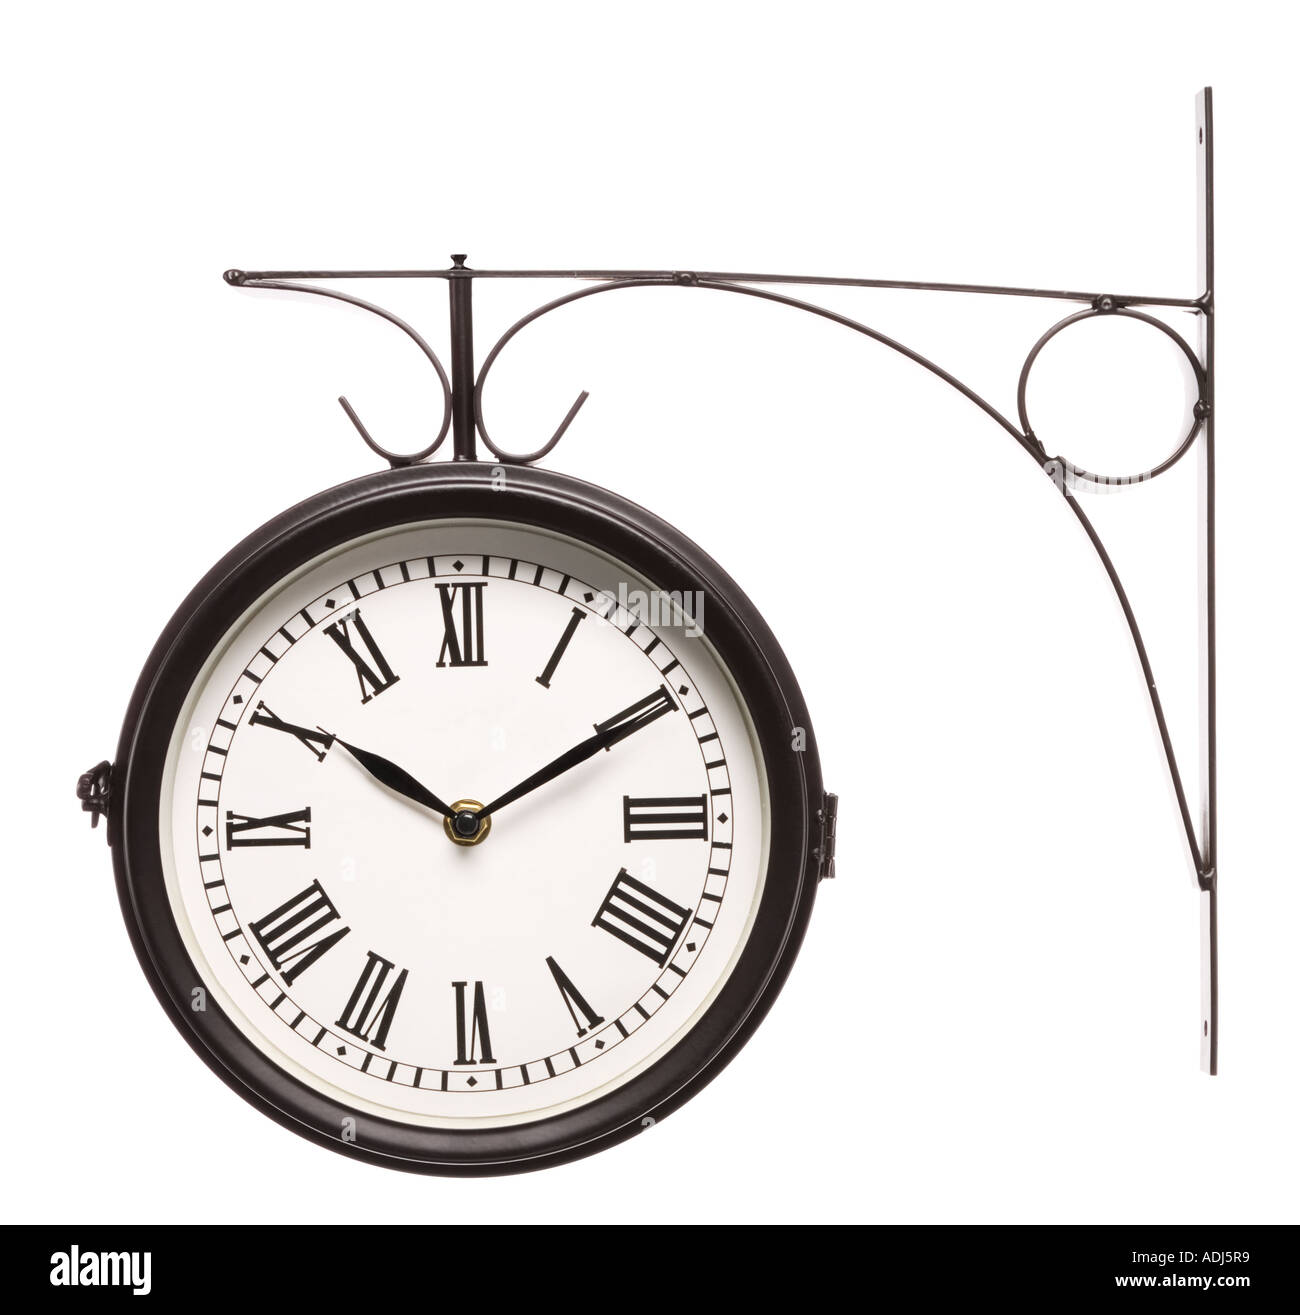 Wall mounted wall clock with roman numerals Stock Photo